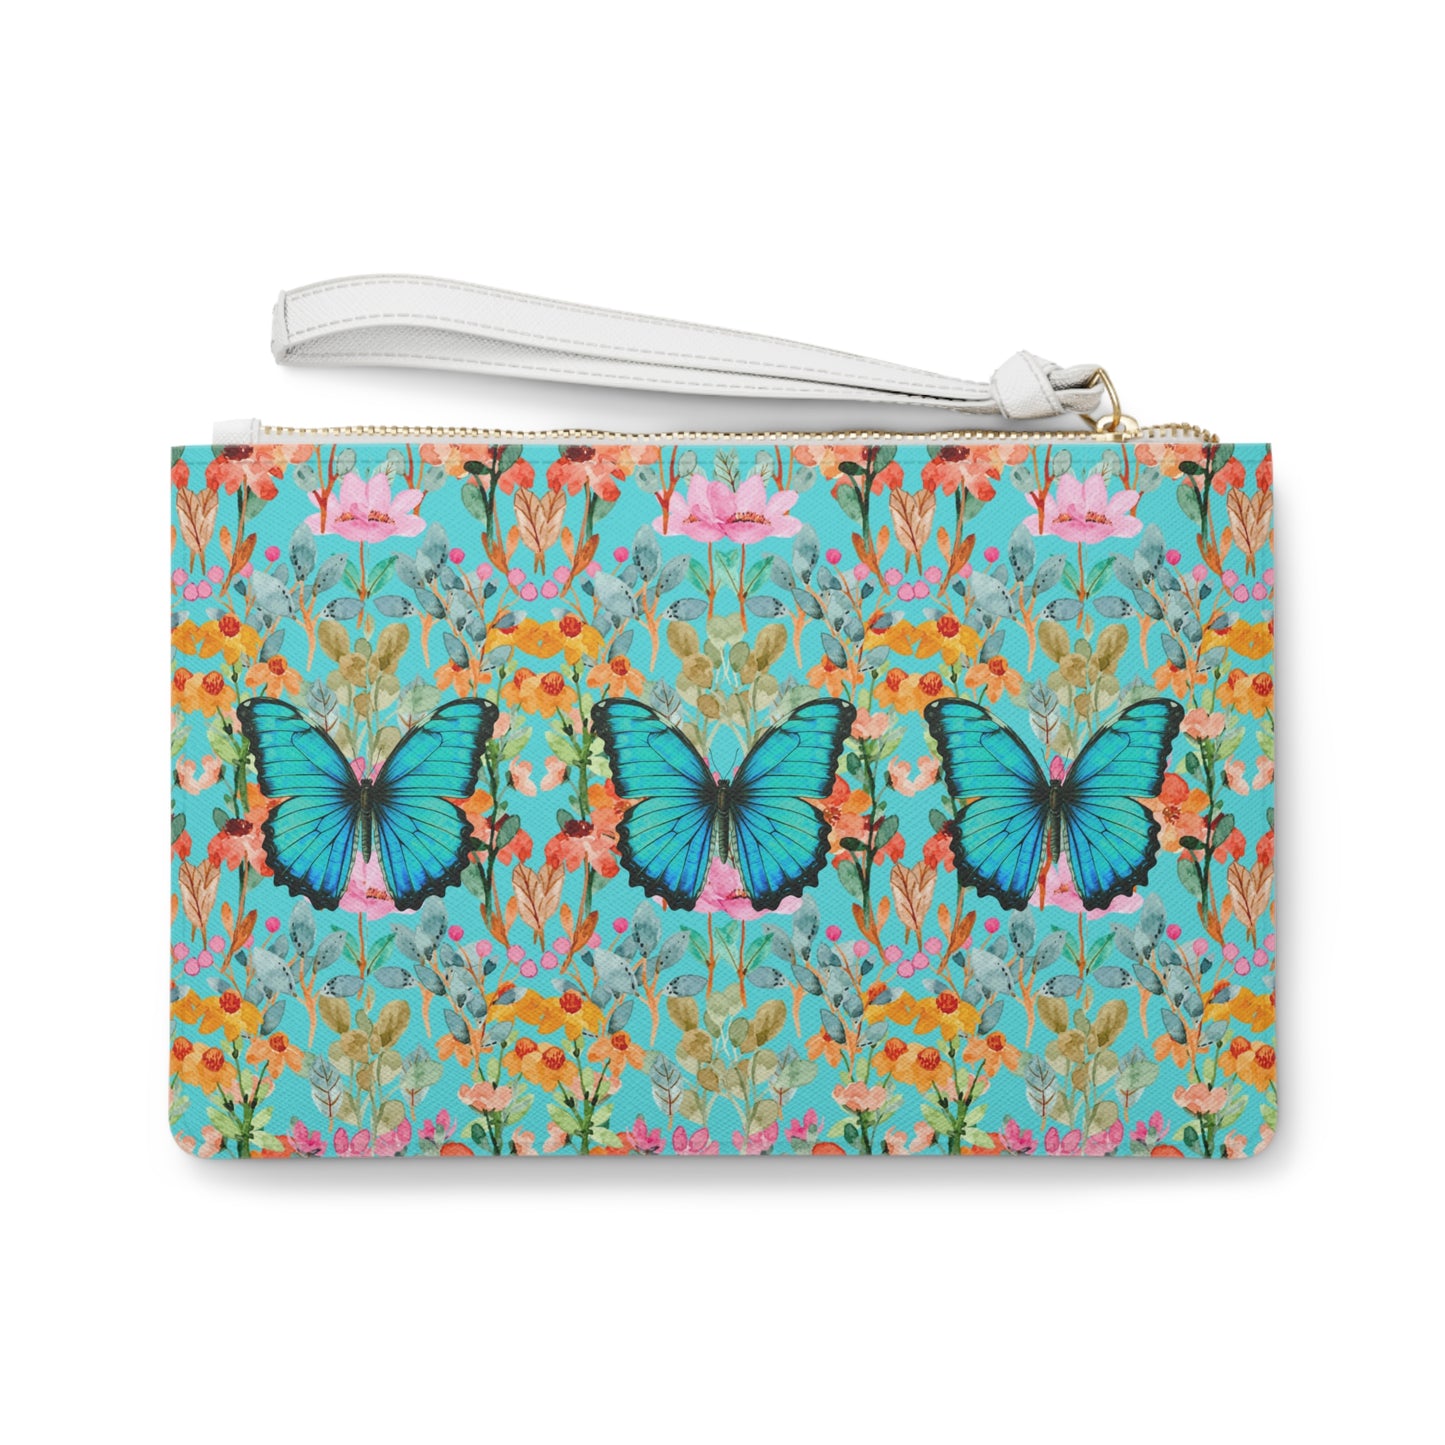 Wildflower Fields Turquoise Evening Daytime Pouch Clutch Bag